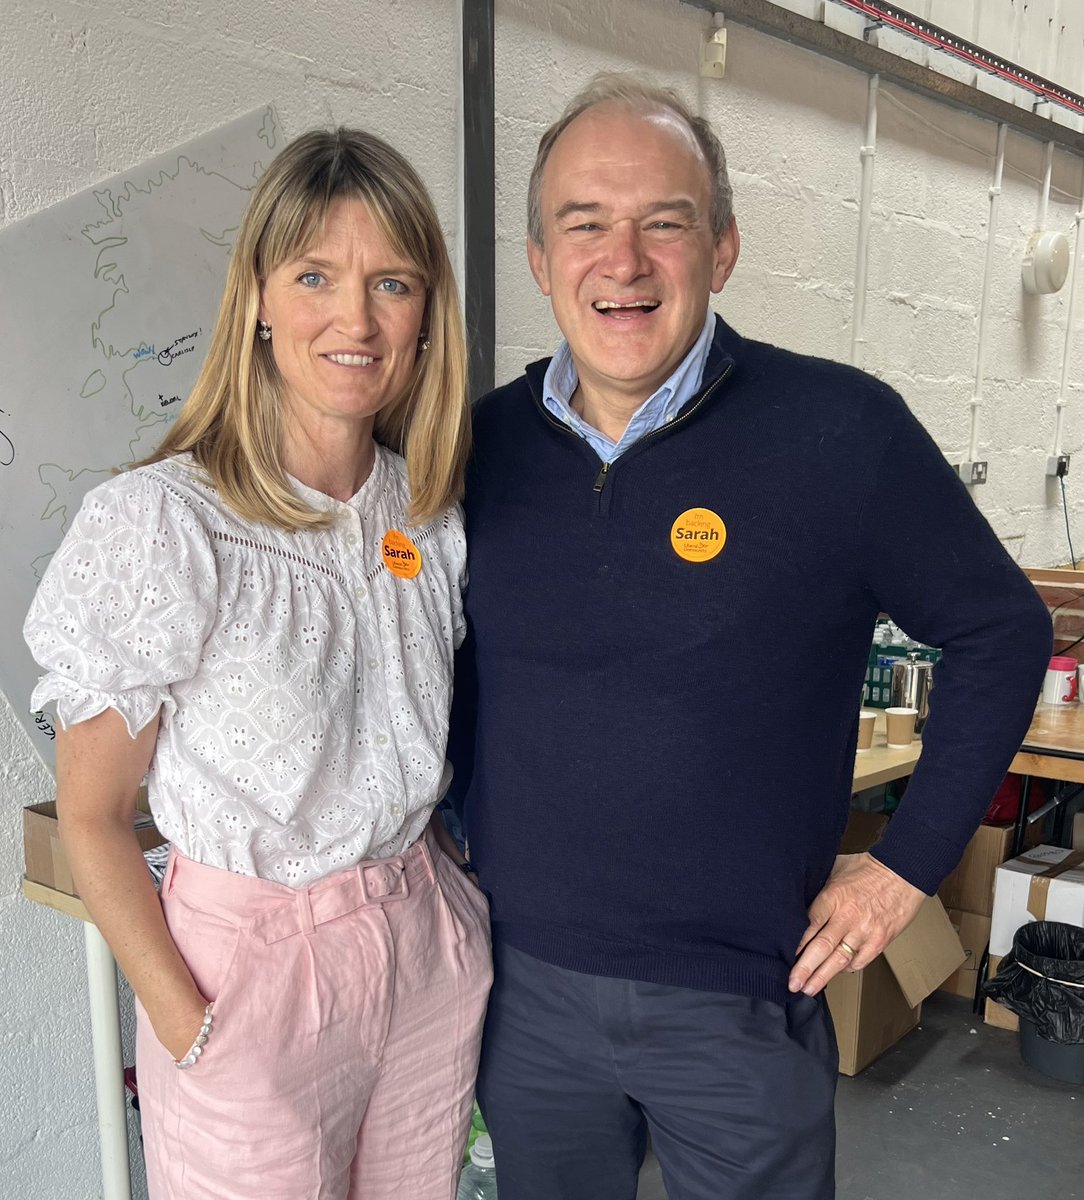 Spirits are high down here in #Frome. Delighted to bump into @EdwardJDavey supporting @SarahDykeLD ahead of Thursday’s by-election.
#winninghere